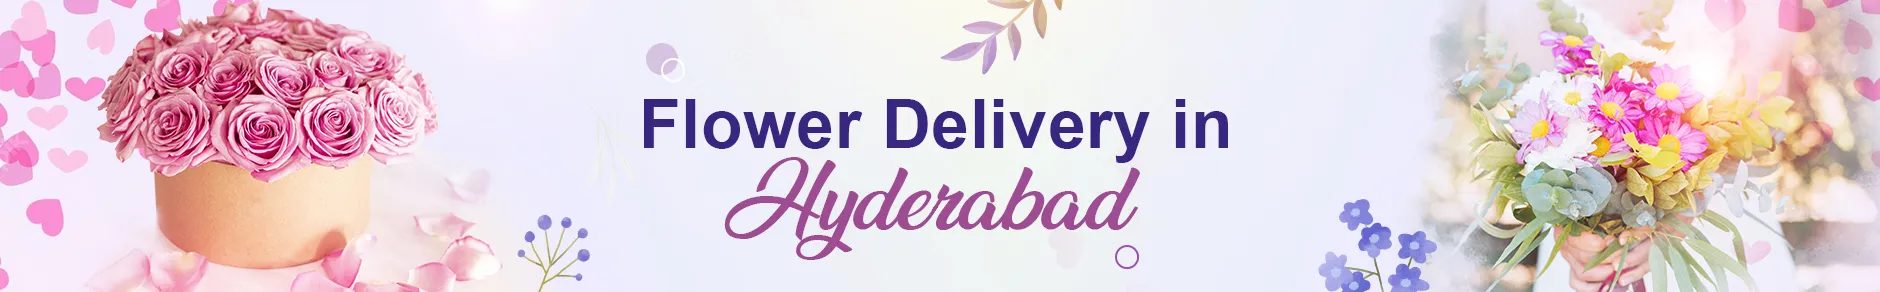 Flower Delivery in Hyderabad | Send Flowers to Hyderabad in 2 hours | Free Delivery